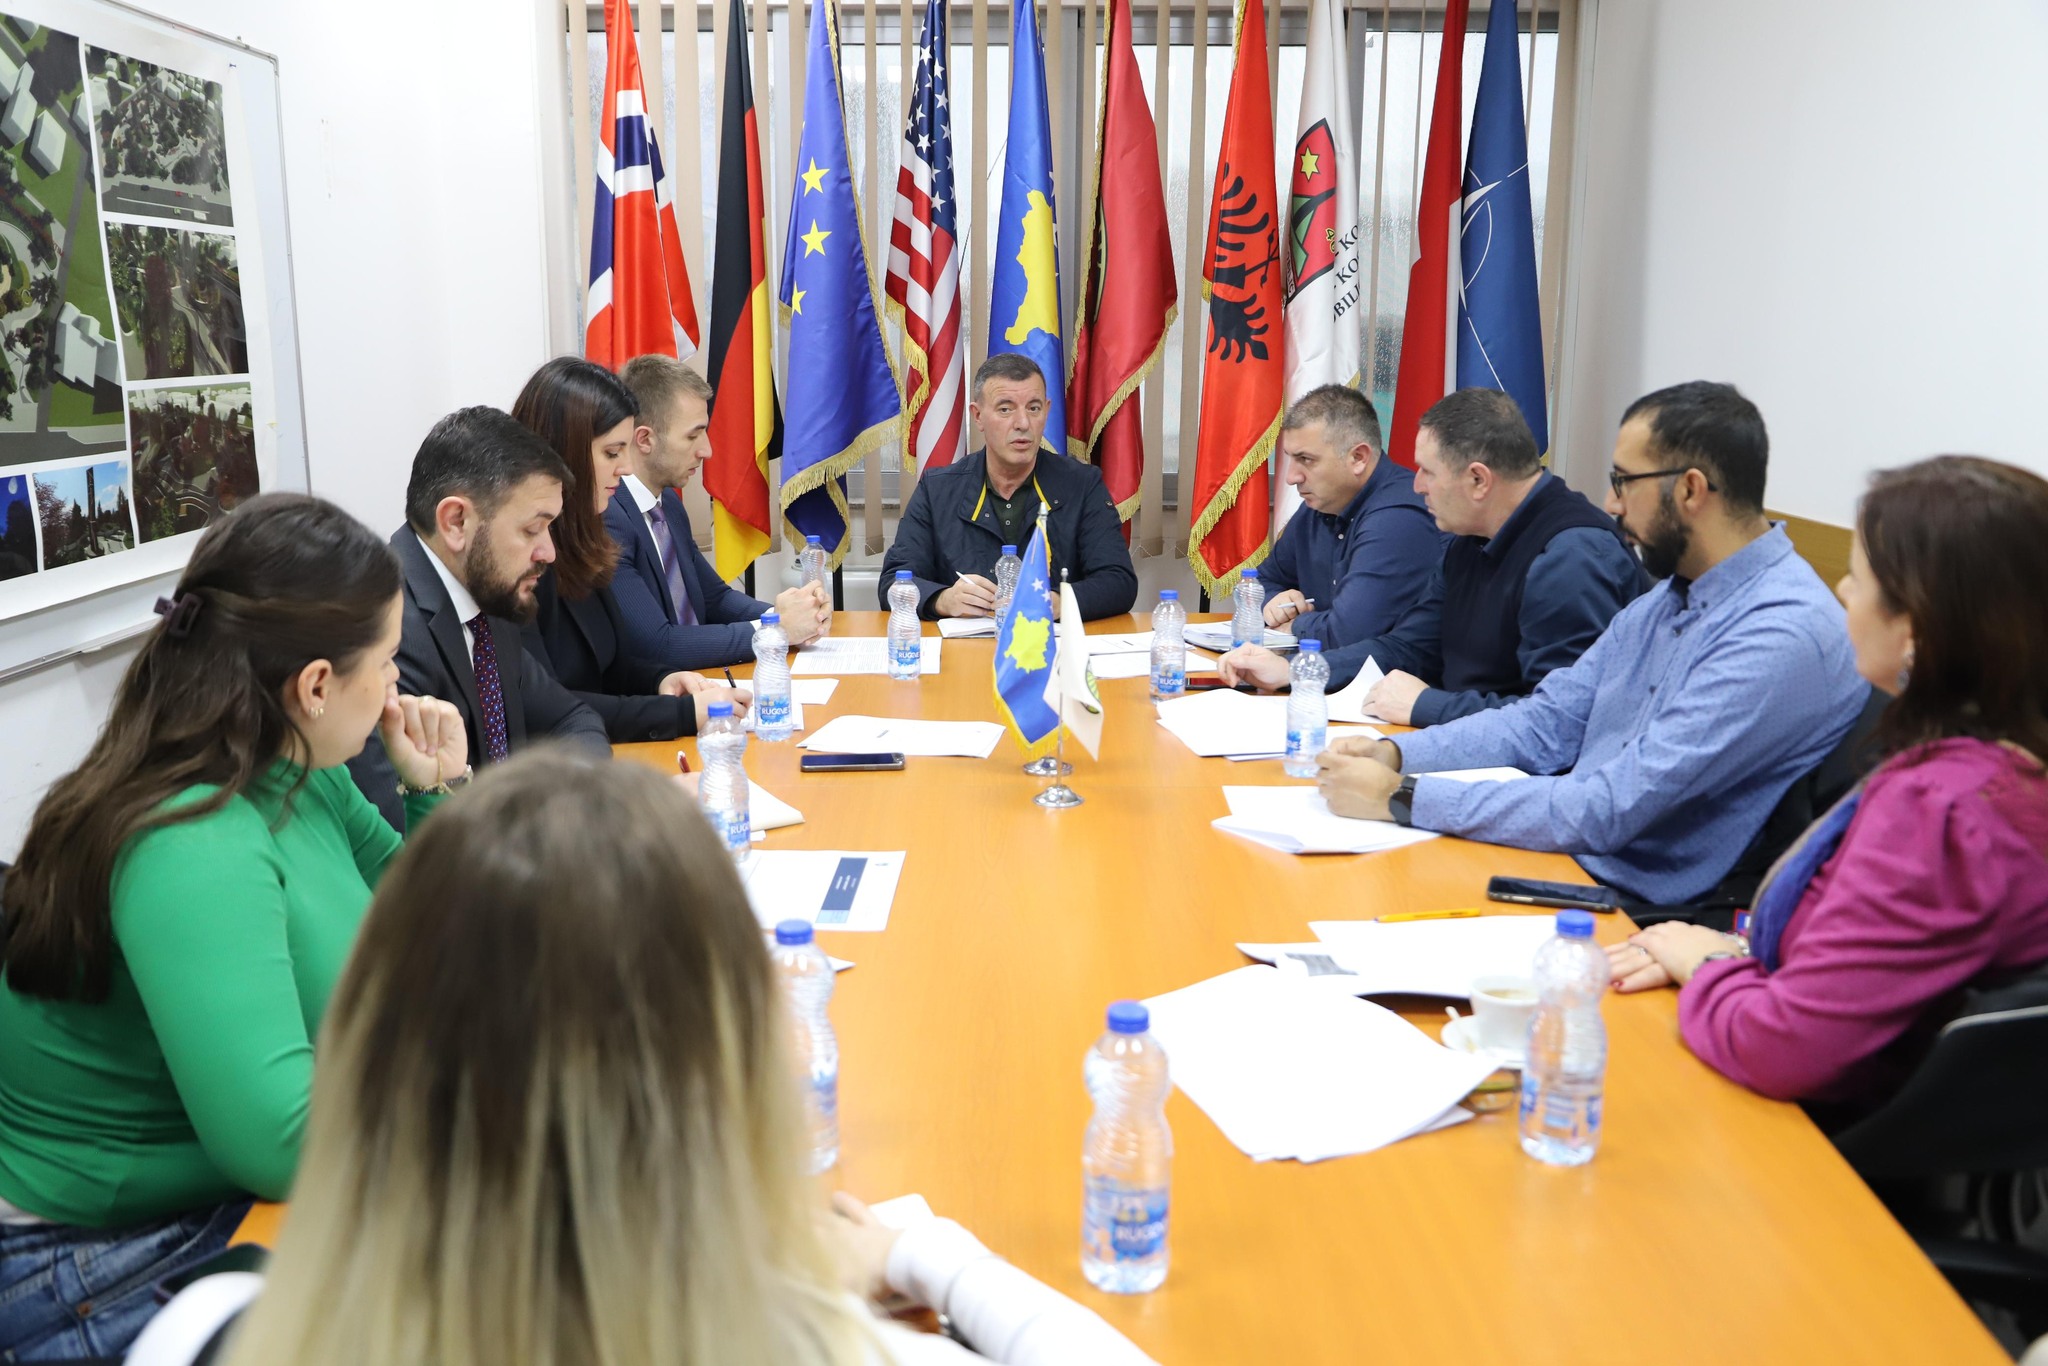 You are currently viewing The Social Audit Group held a meeting with the mayor of the Municipality of Obiliq